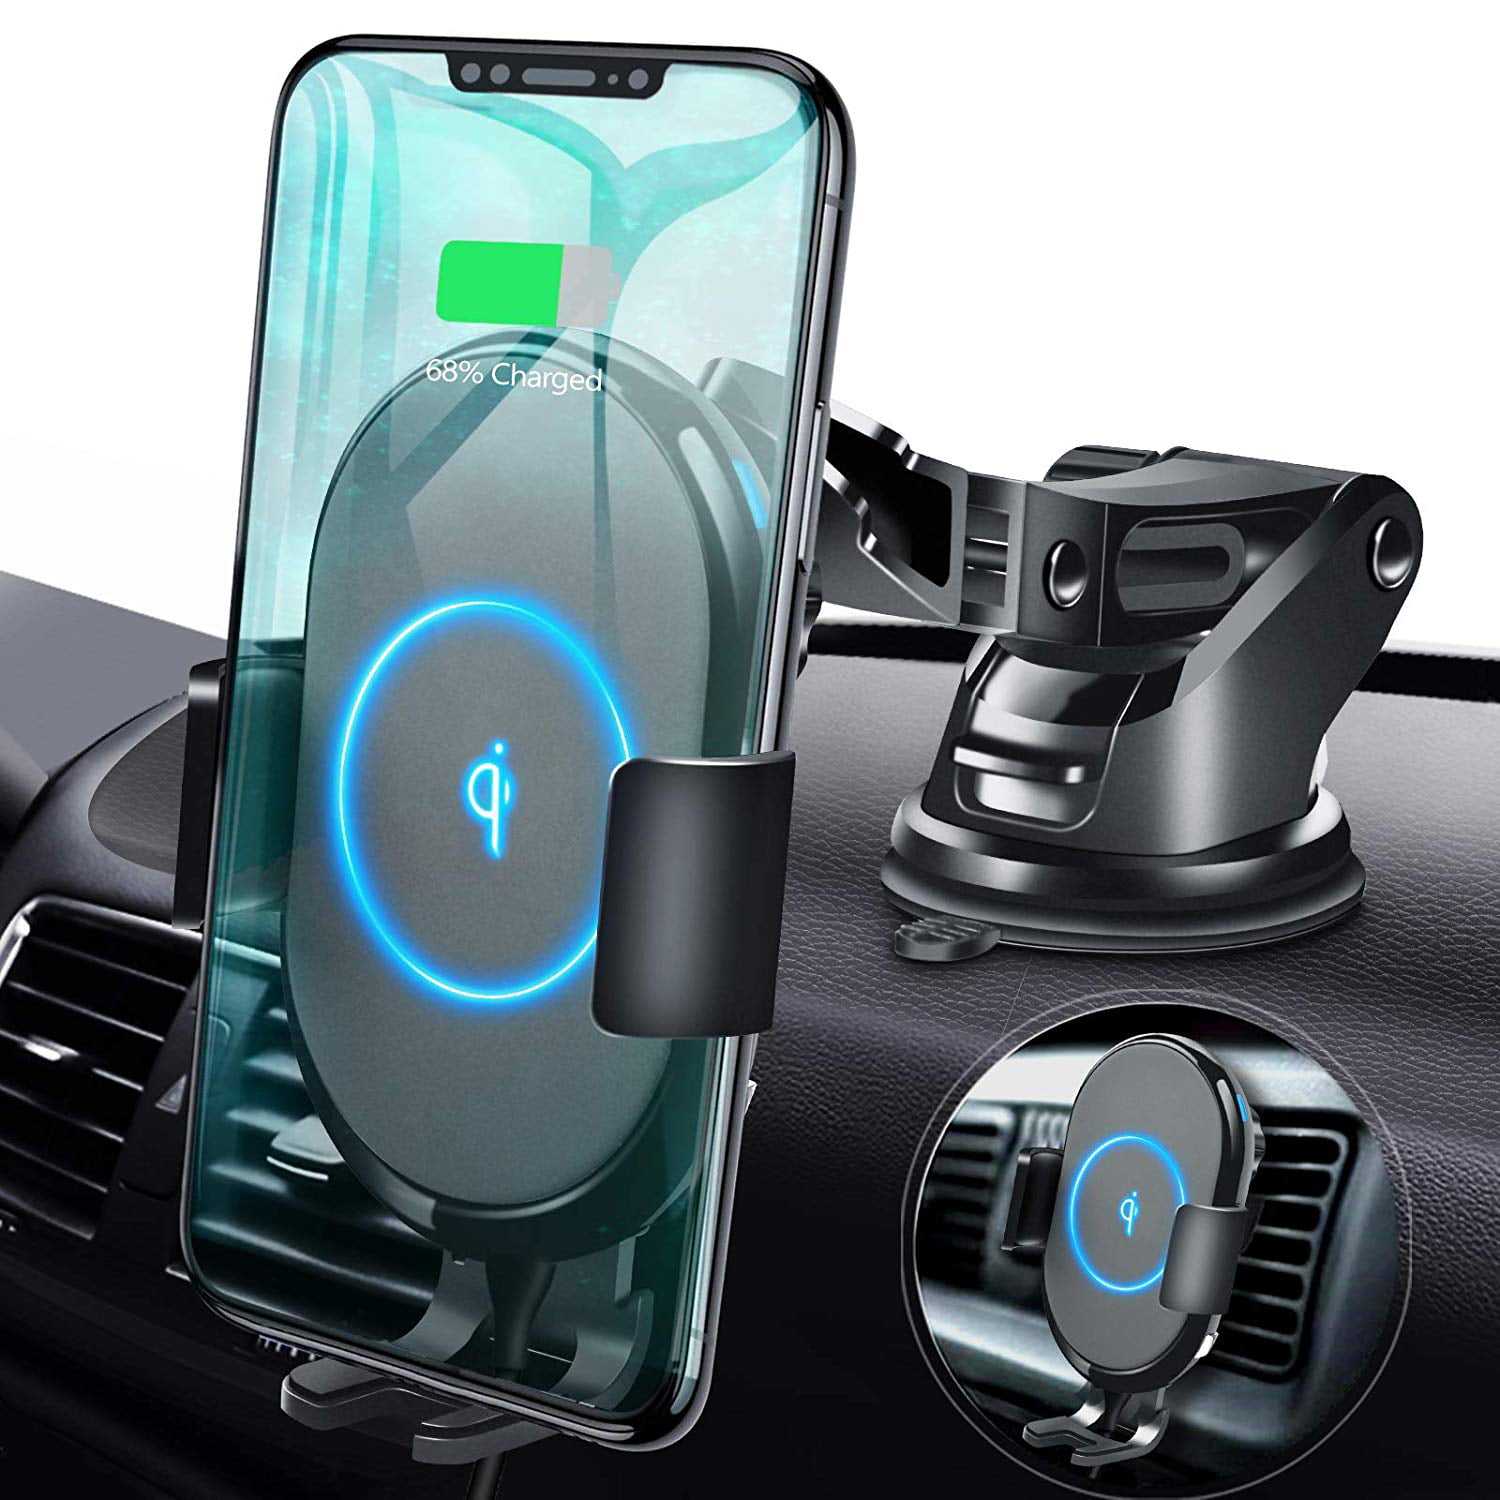 Wireless Car Charger Mount,Automatic Clamping Fast Charger Air Vent Car Phone Holder 10W for Samsung Galaxy S9/S9+/S8/S8+/Note9/Note8,7.5W for iPhone Xs Max/Xs/XR/X/8/8 Plus&All Qi-Enabled Smartphone 